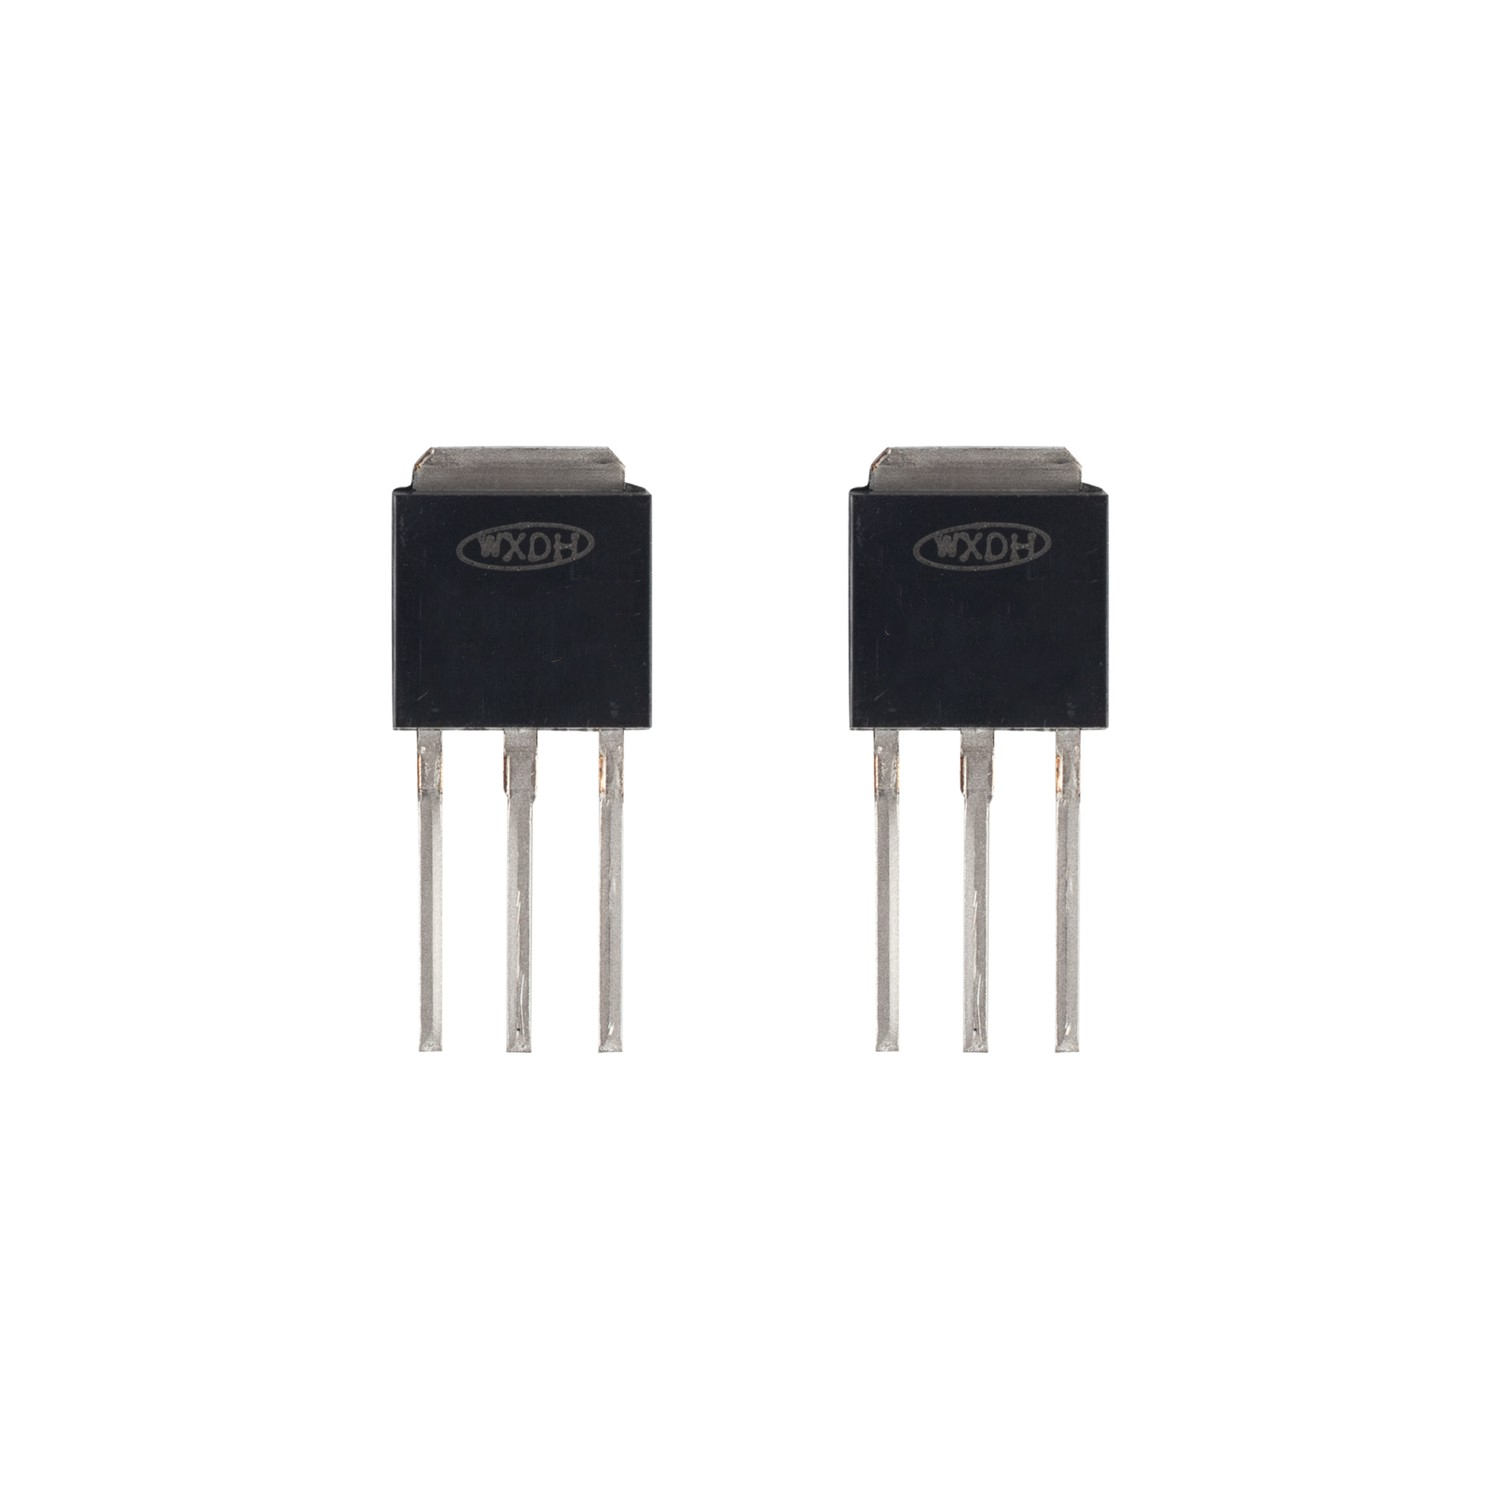 240A 60V N-channel Enhancement Mode Power MOSFET